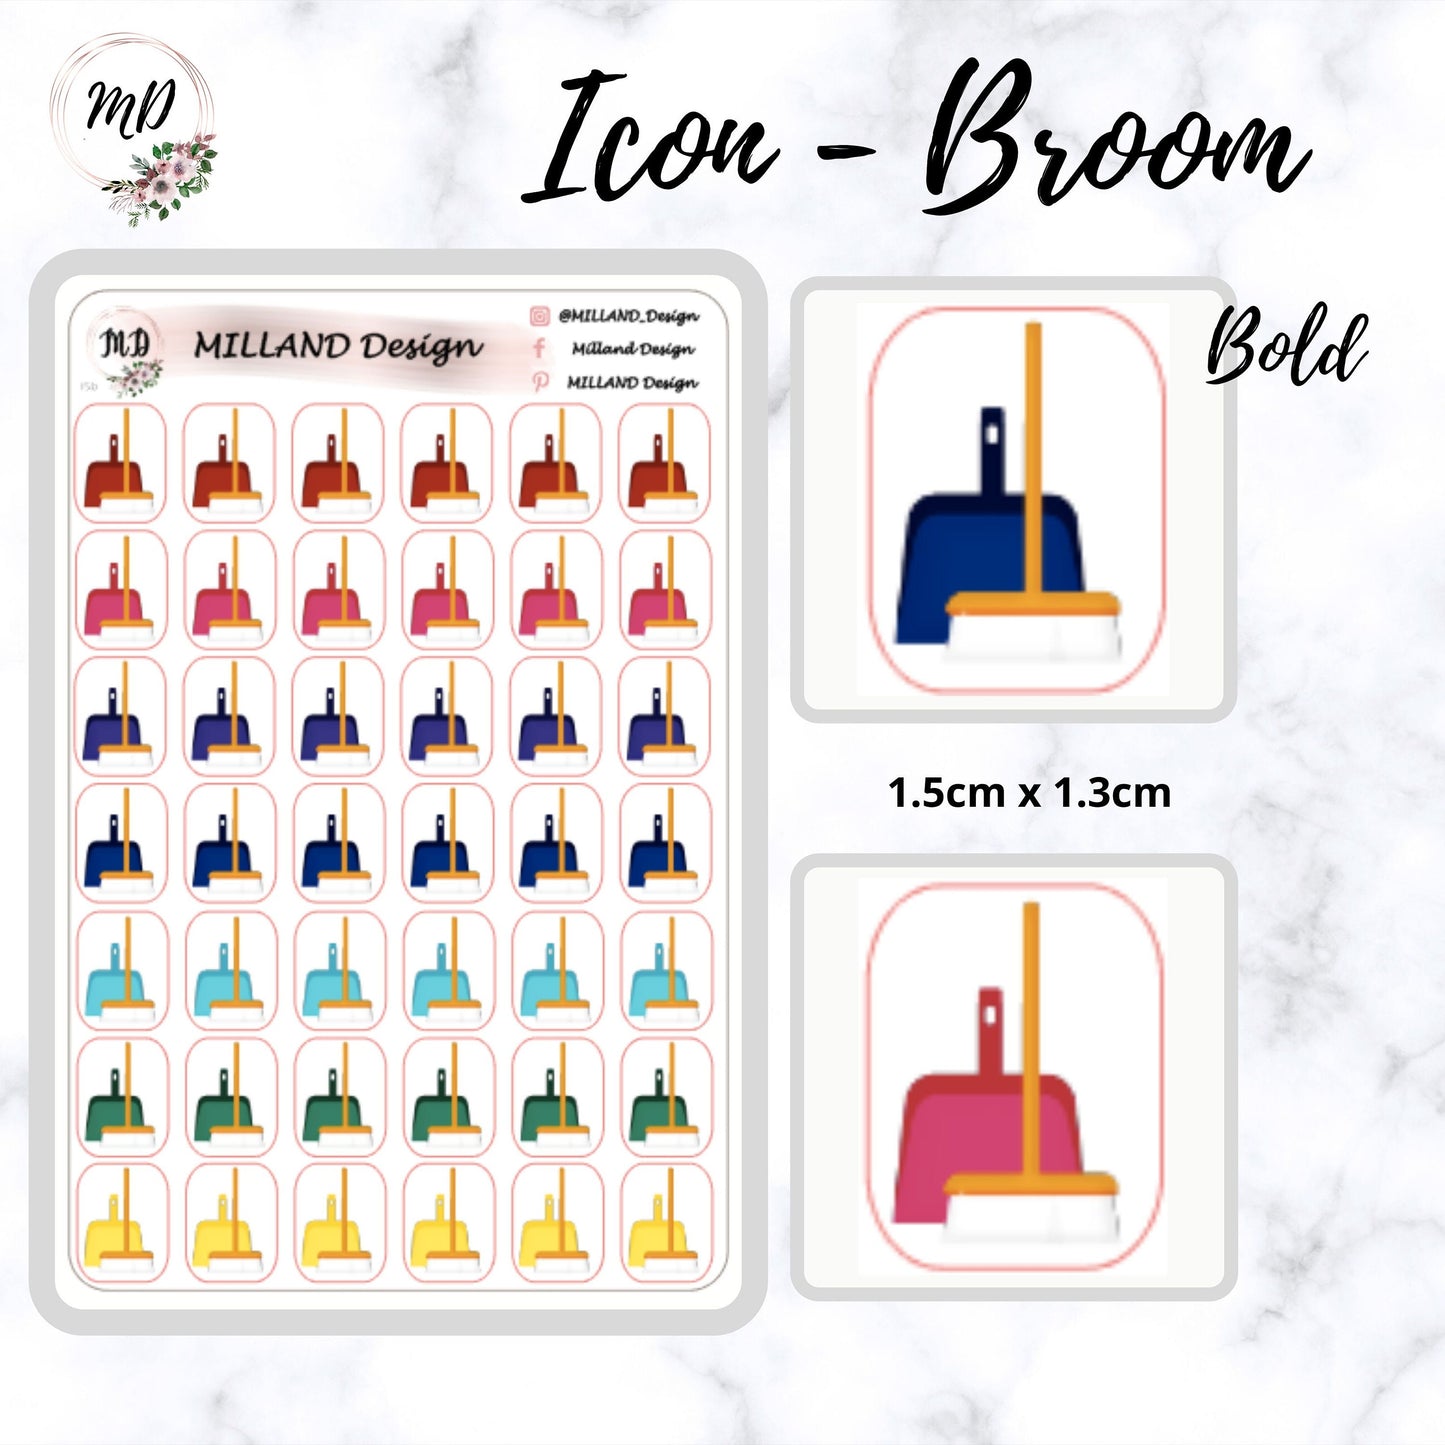 Broom, chores Icon Stickers for planner | Planner Sticker | Cleaning Sticker | cleaning icon | Housework sticker | housework icon